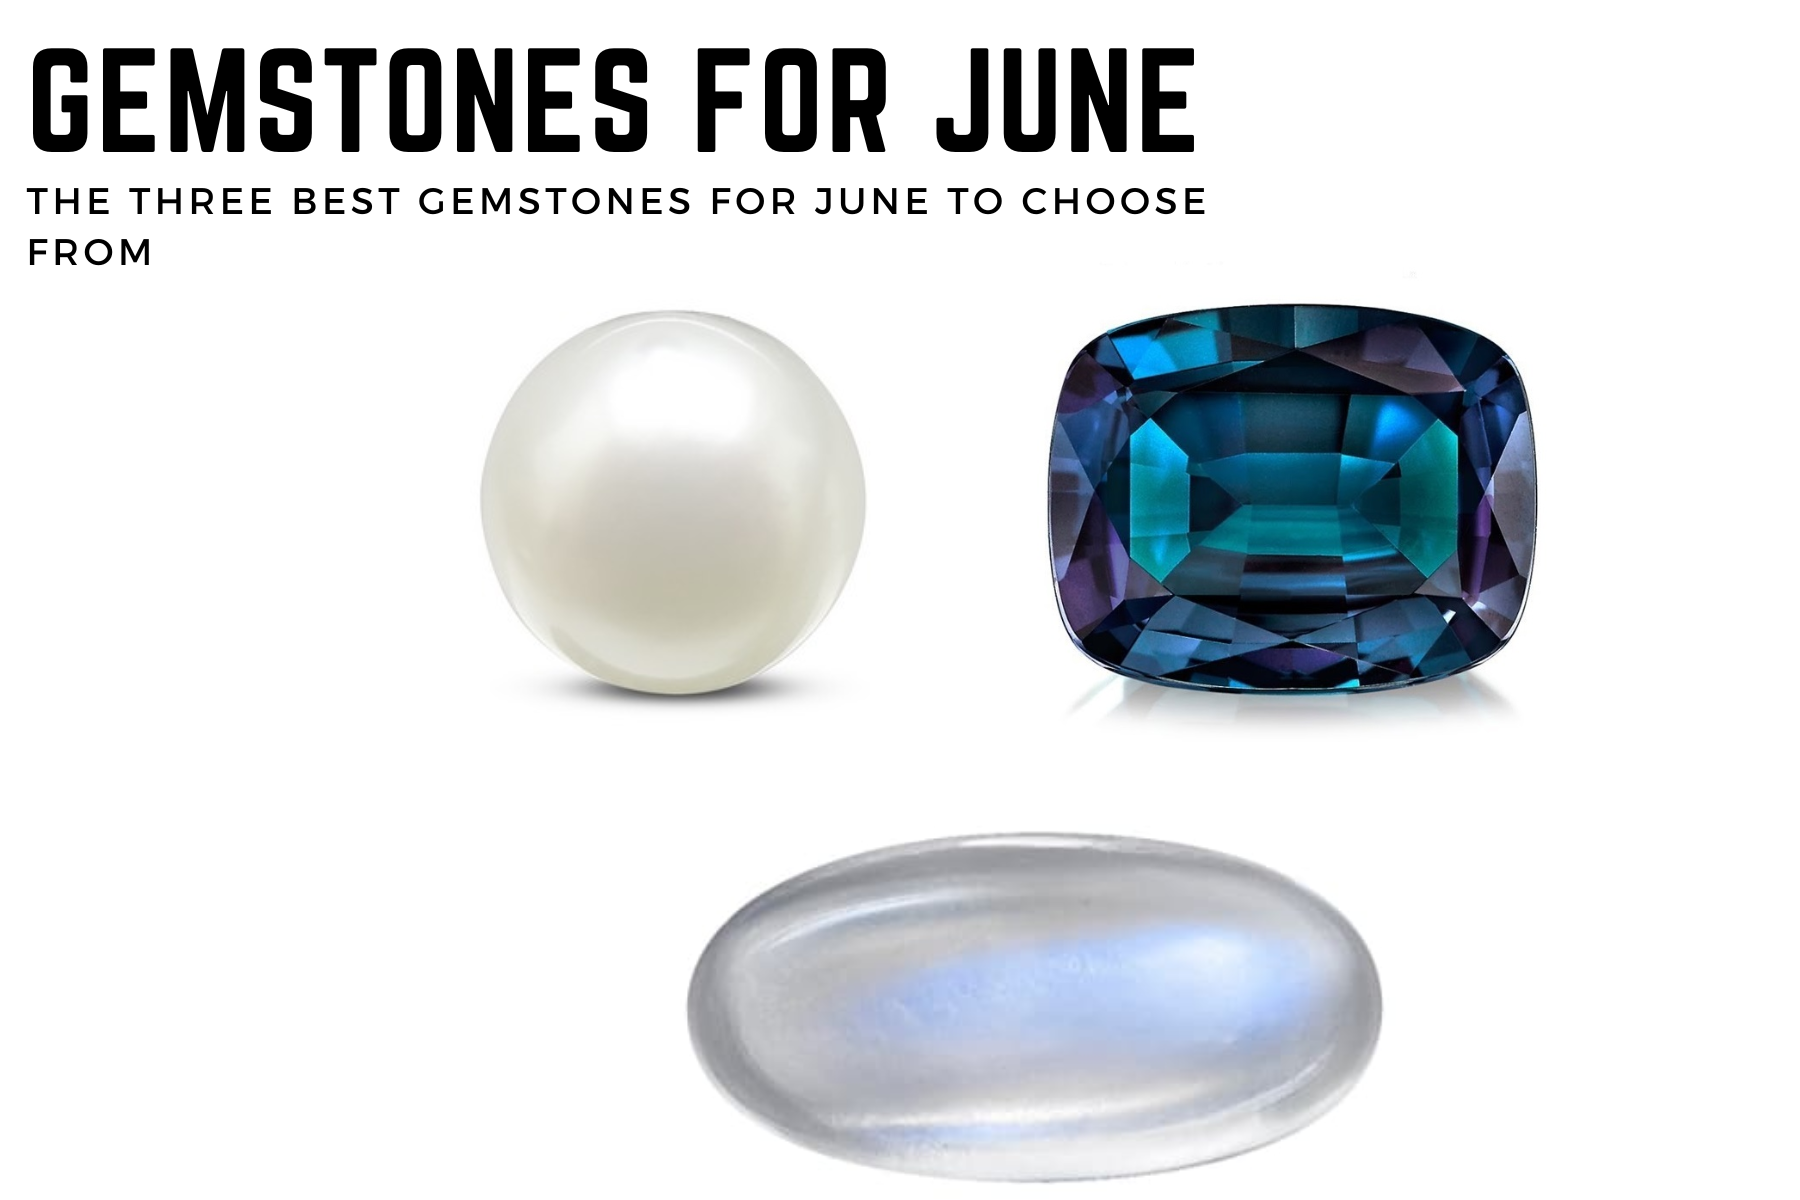 Gemstones For June - The Top Three Gemstones To Choose From